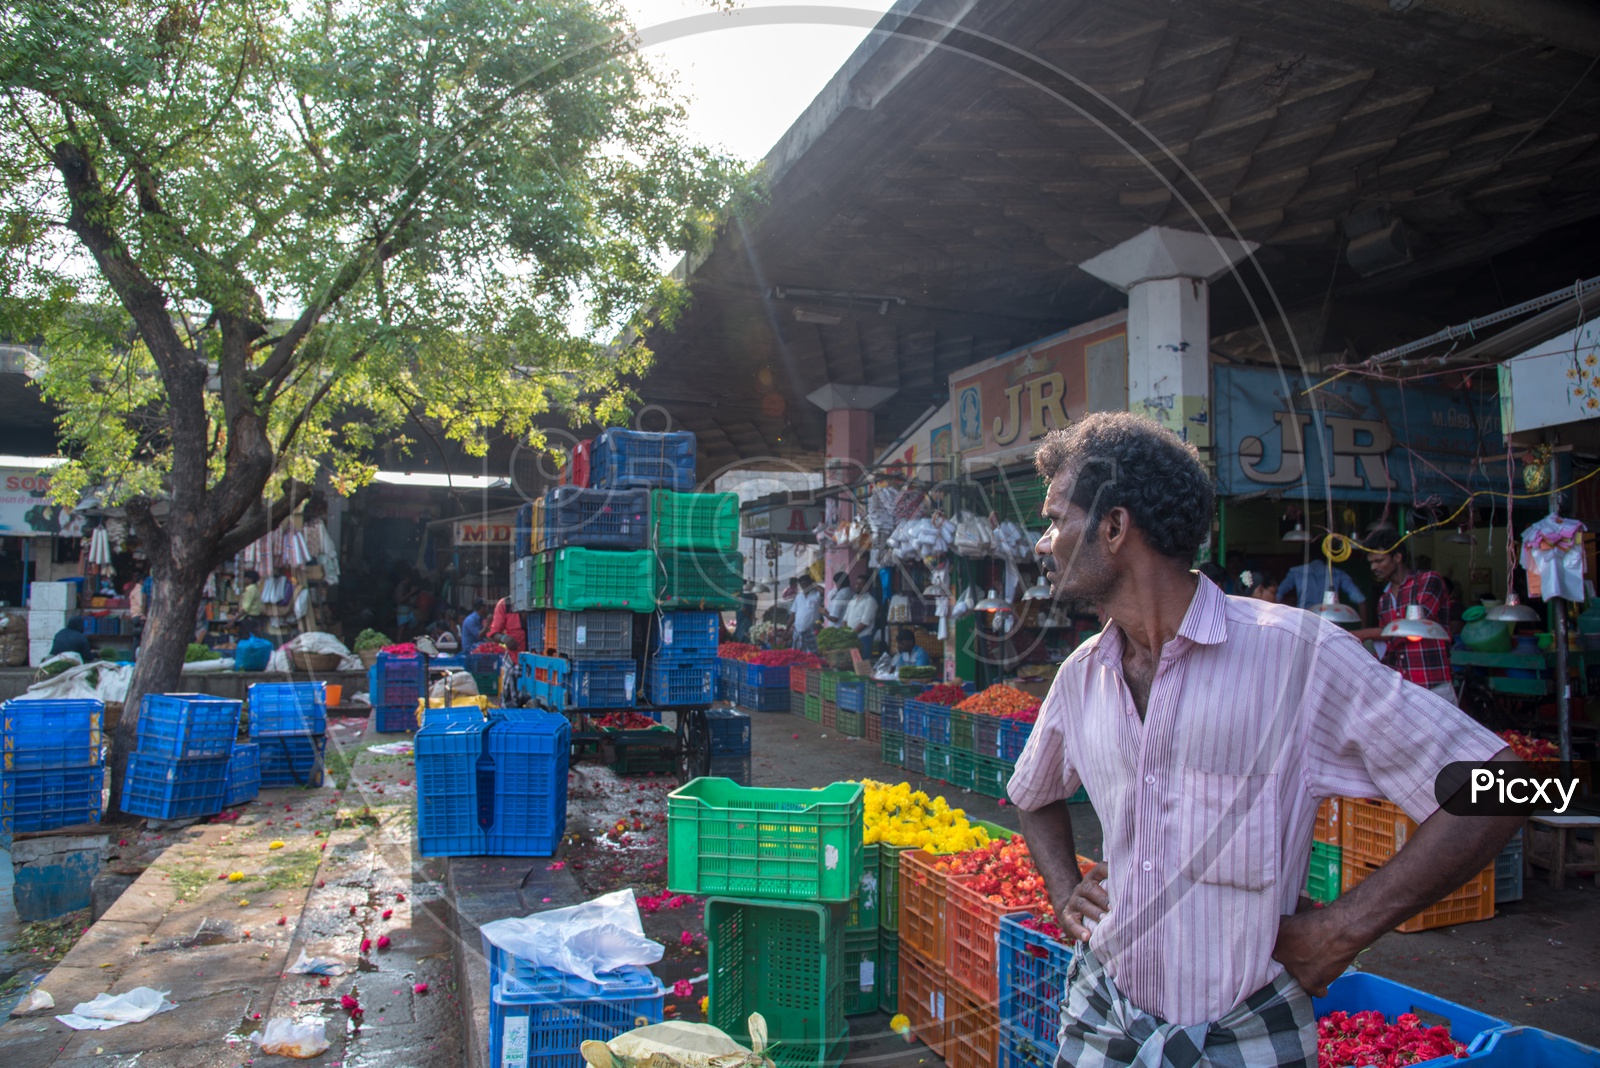 A person looks after the Flower Market.